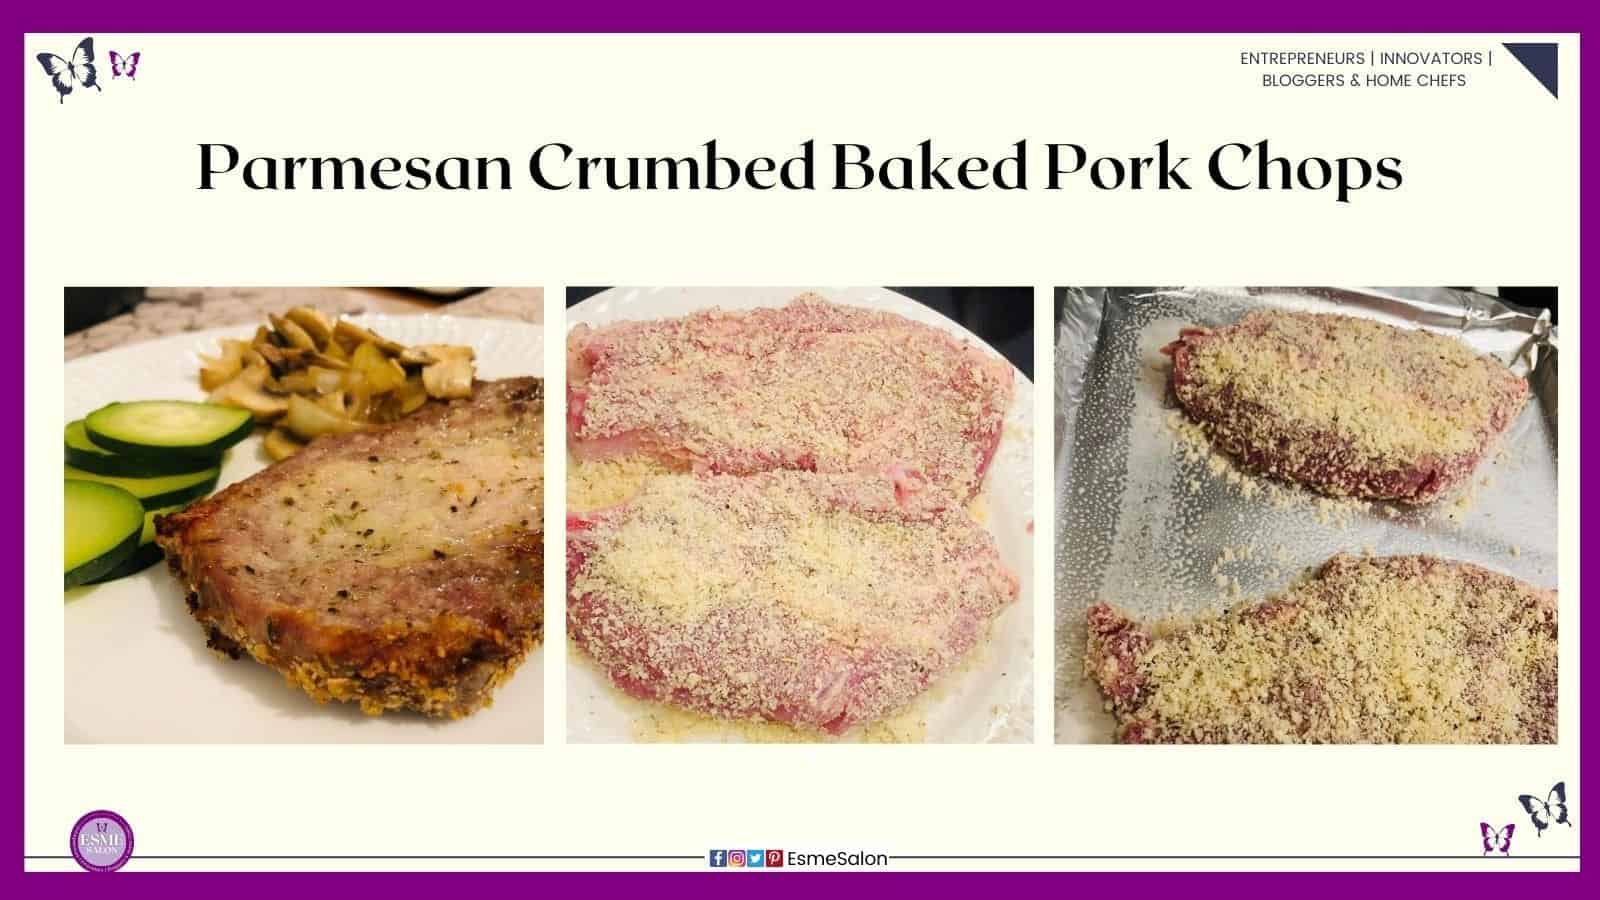 an image of Parmesan Crumbed Baked Pork Chops, baked with veggies, raw and ready to be baked